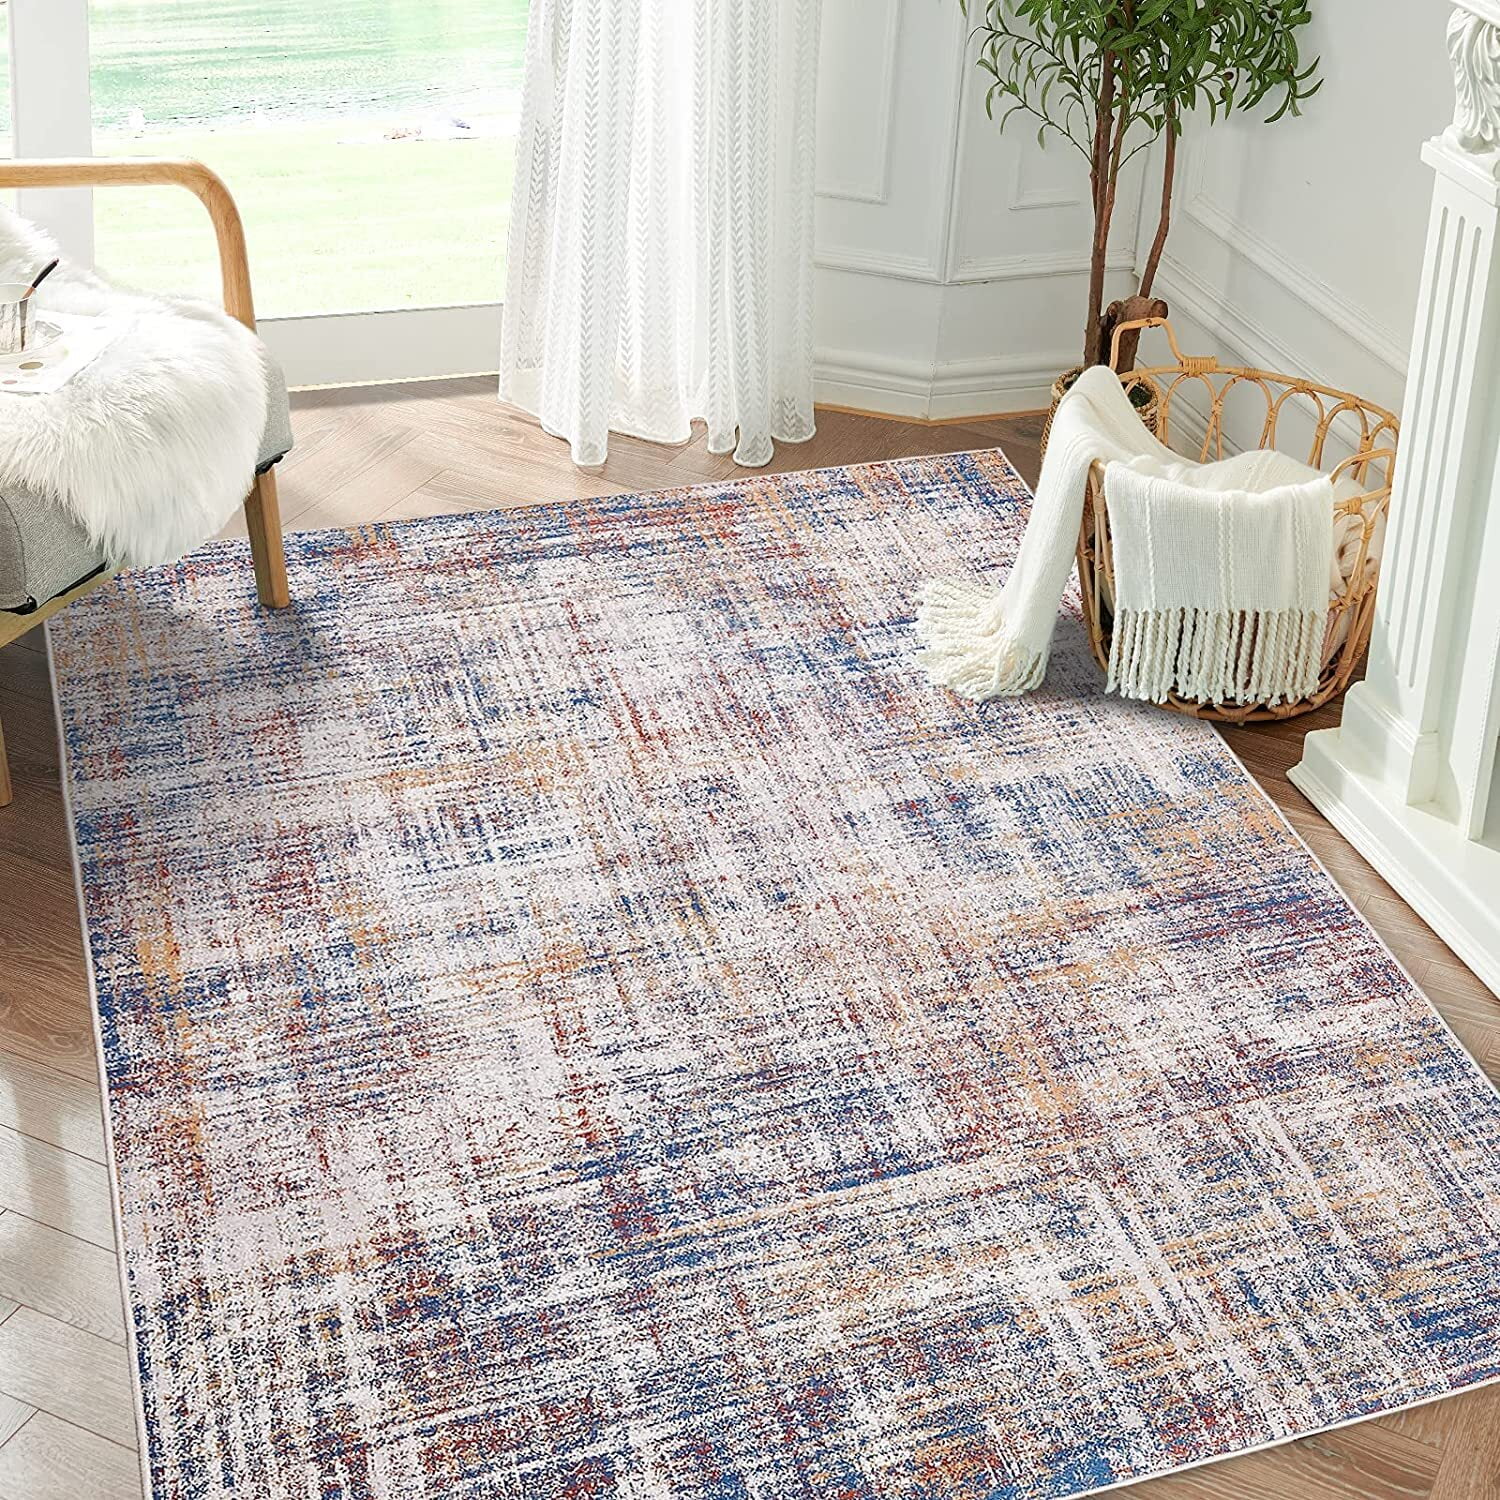 BLUE / GREY Modern Abstract Small Extra Large Floor Carpets Rugs Mats  Distressed Carpet for All Area, Bedrooms, Living Room ,kitchens. 